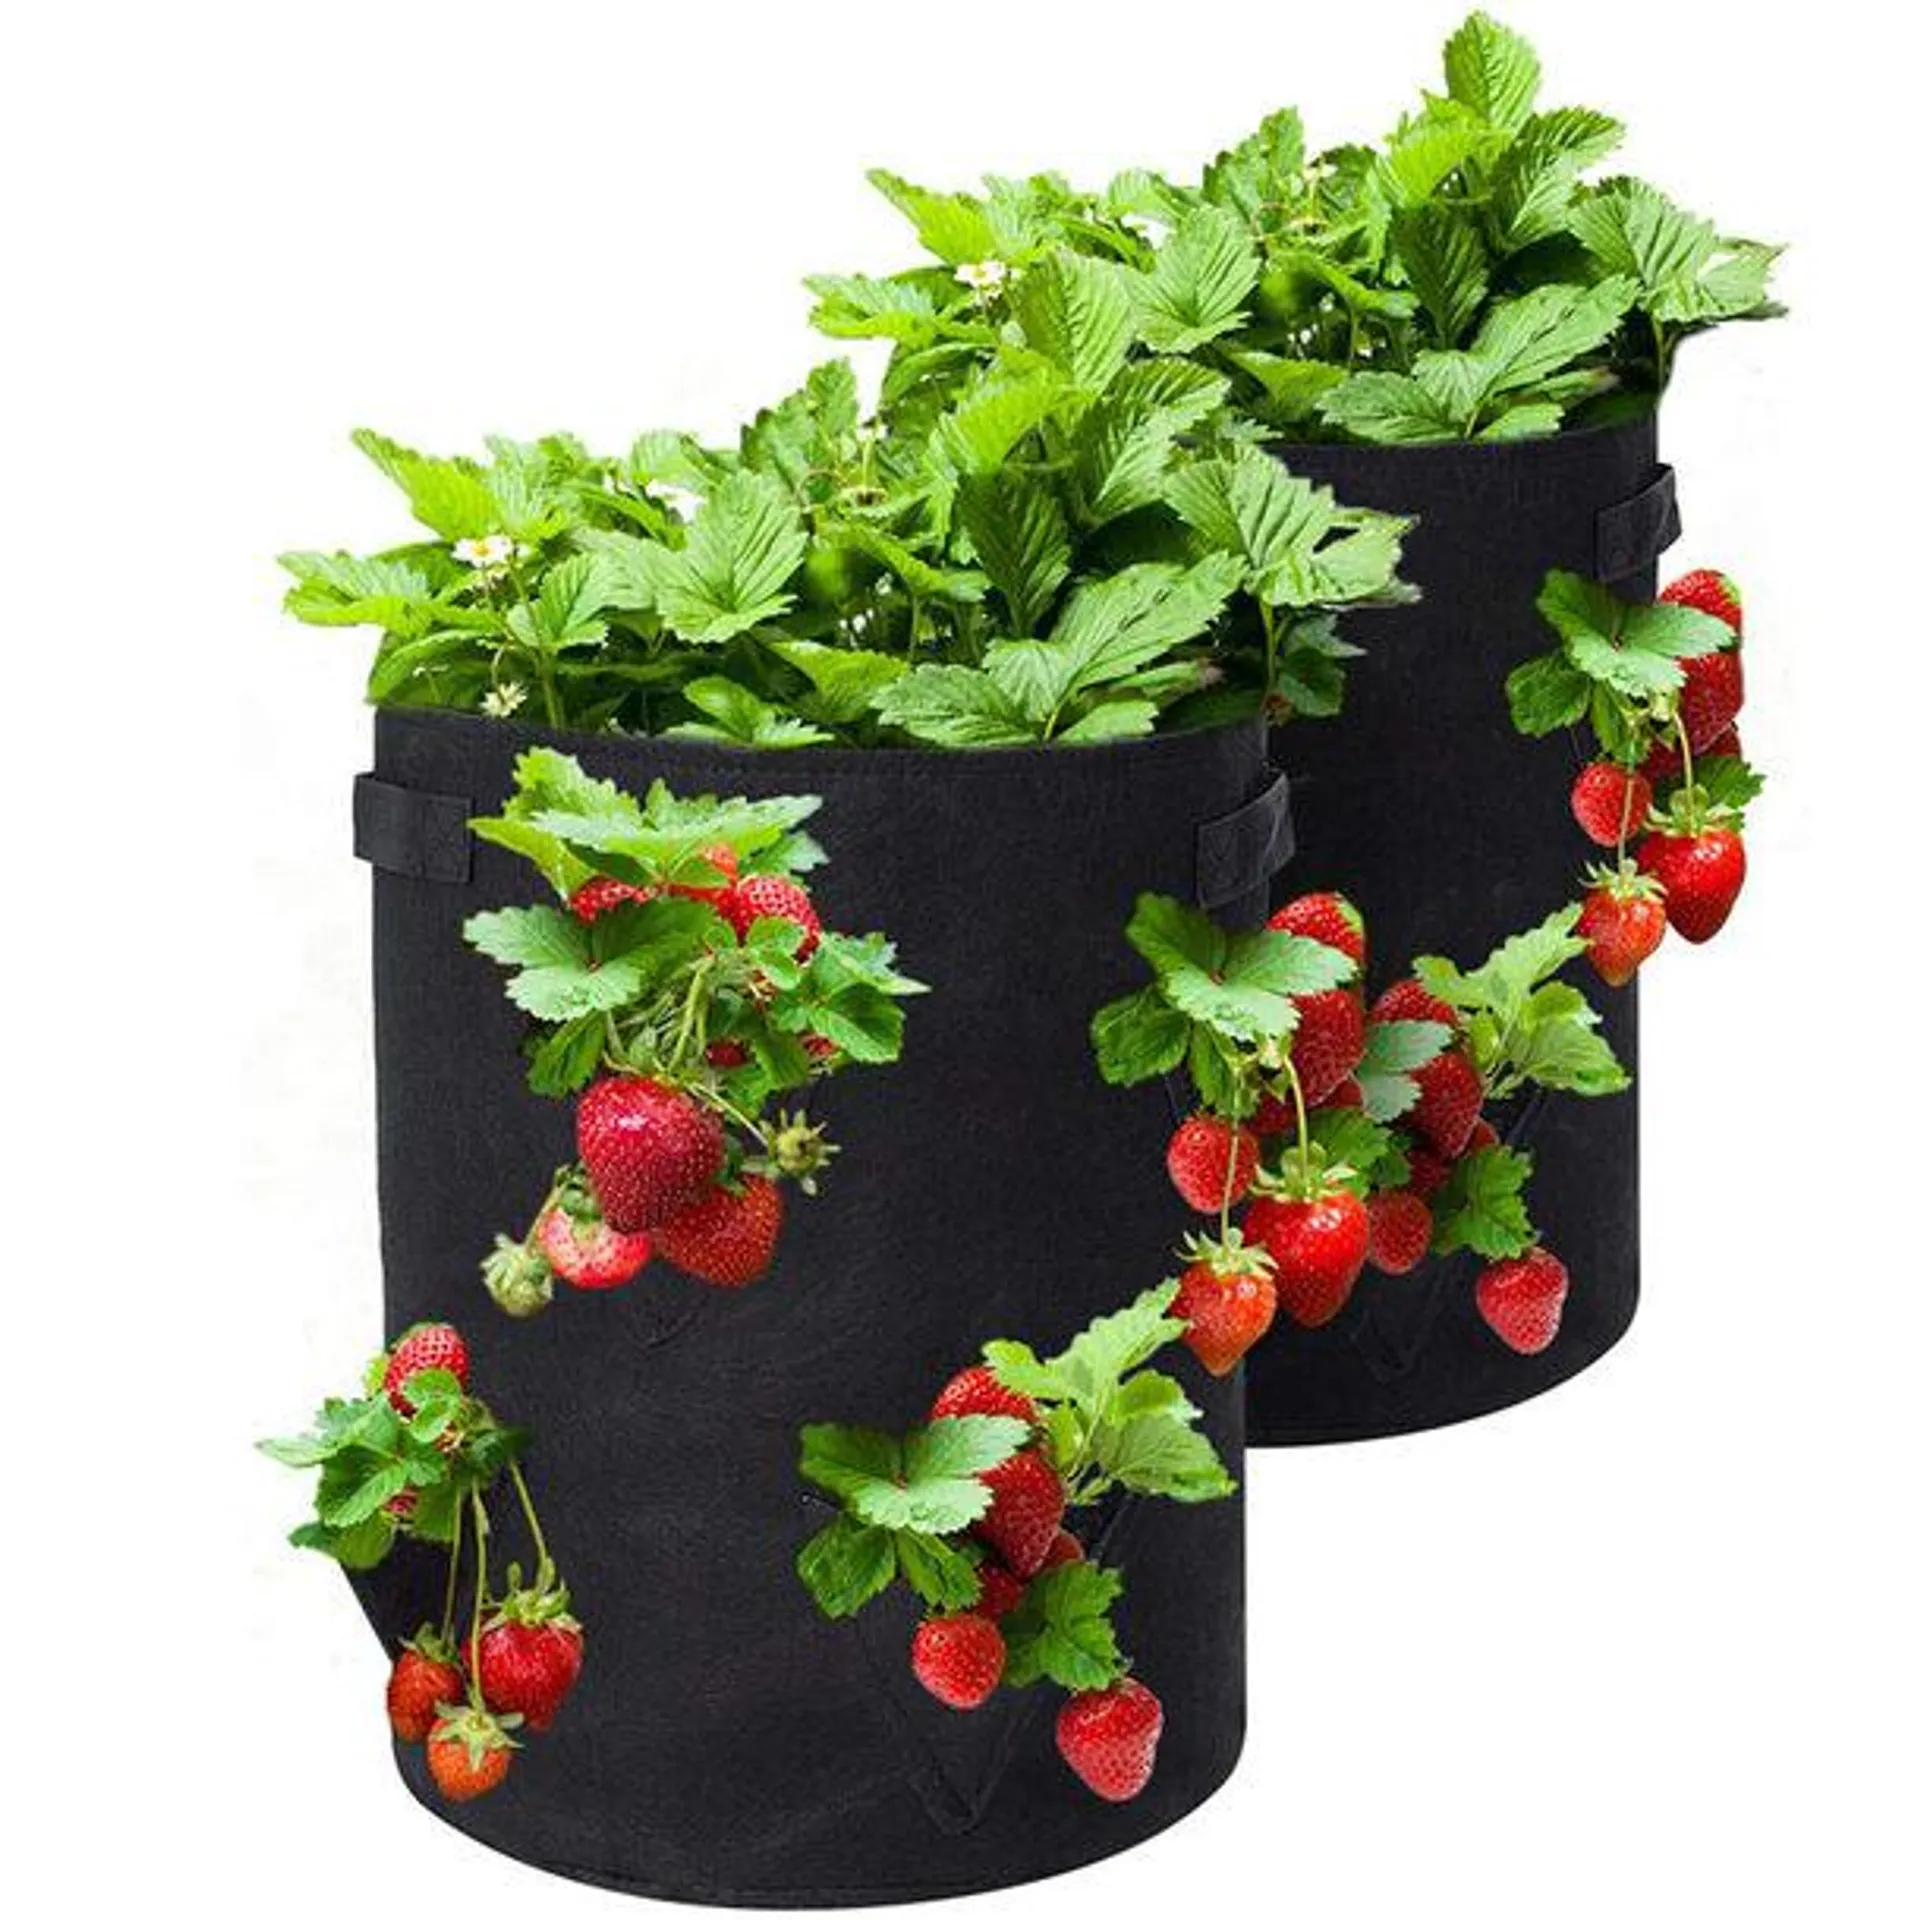 Strawberry Grow Bags (Pack of 2)